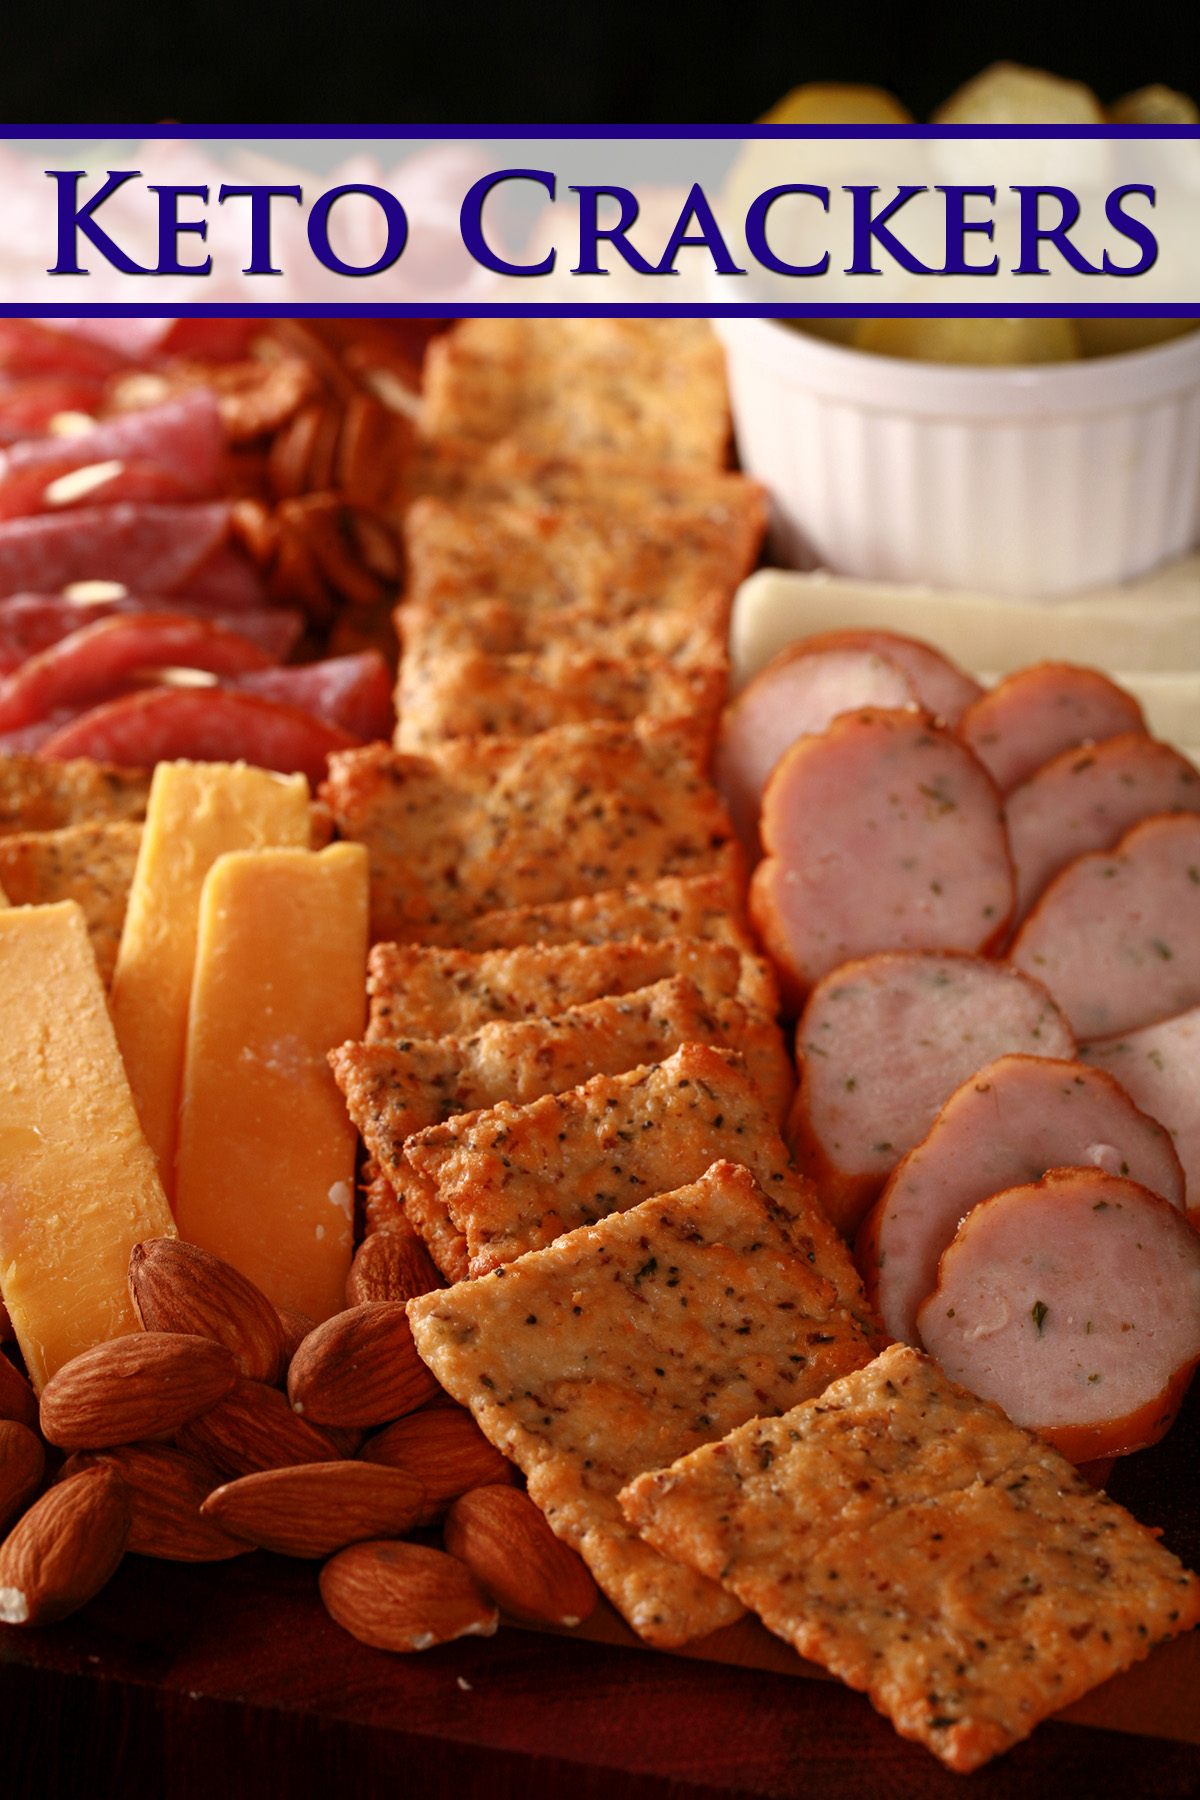 A low carb charcuterie plate featuring keto crackers.